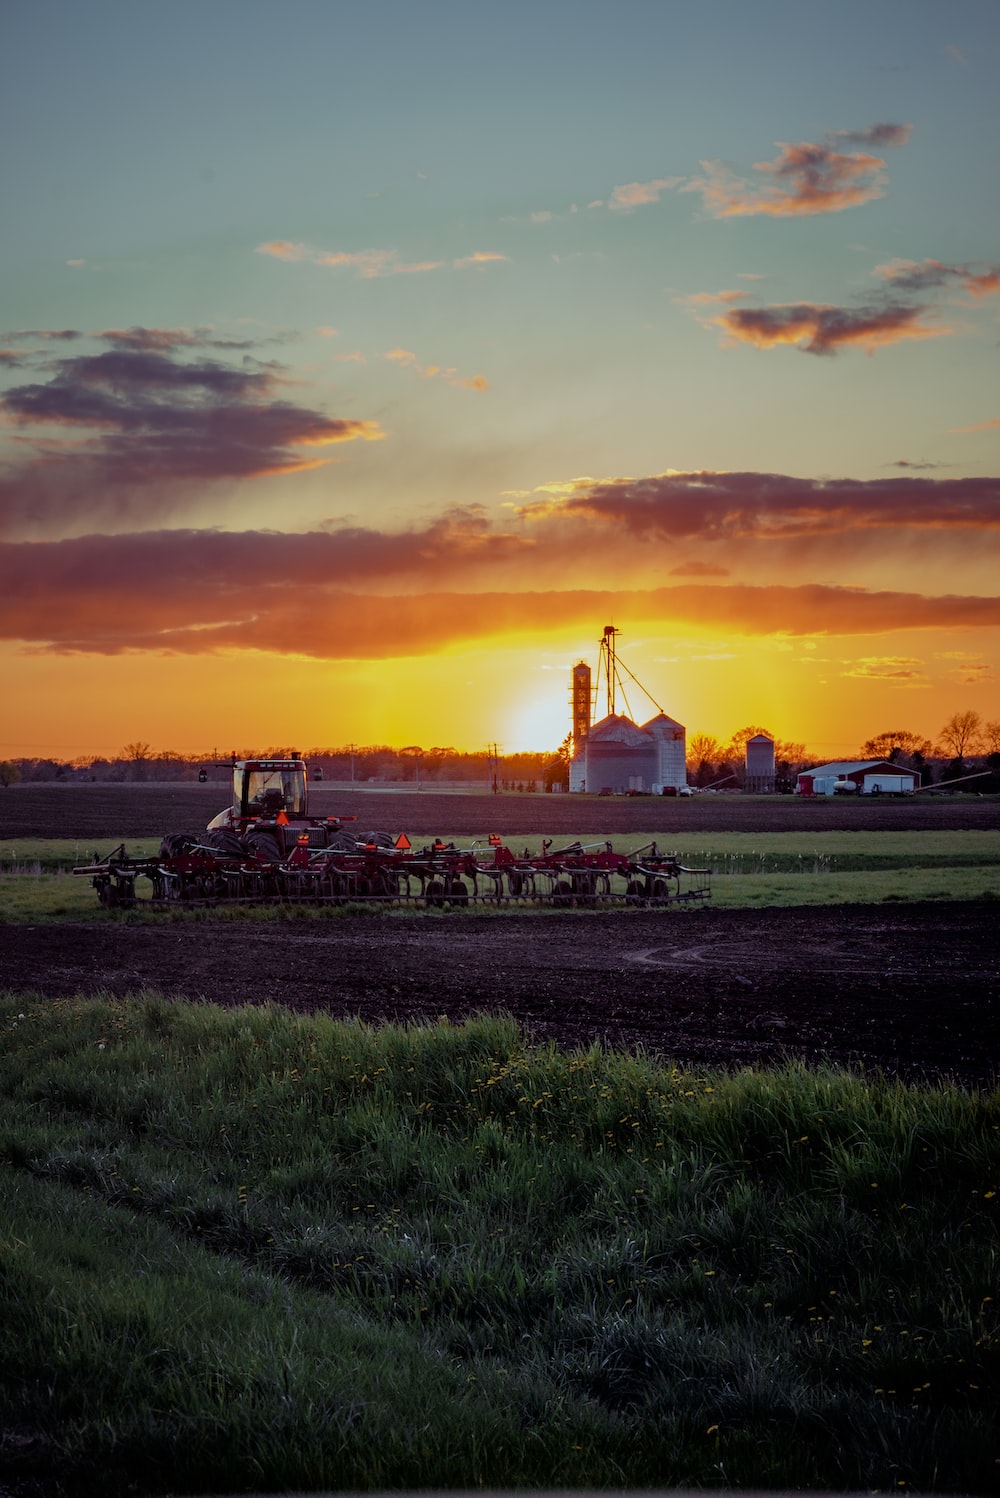 Sunset Farm Picture. Download Free Image